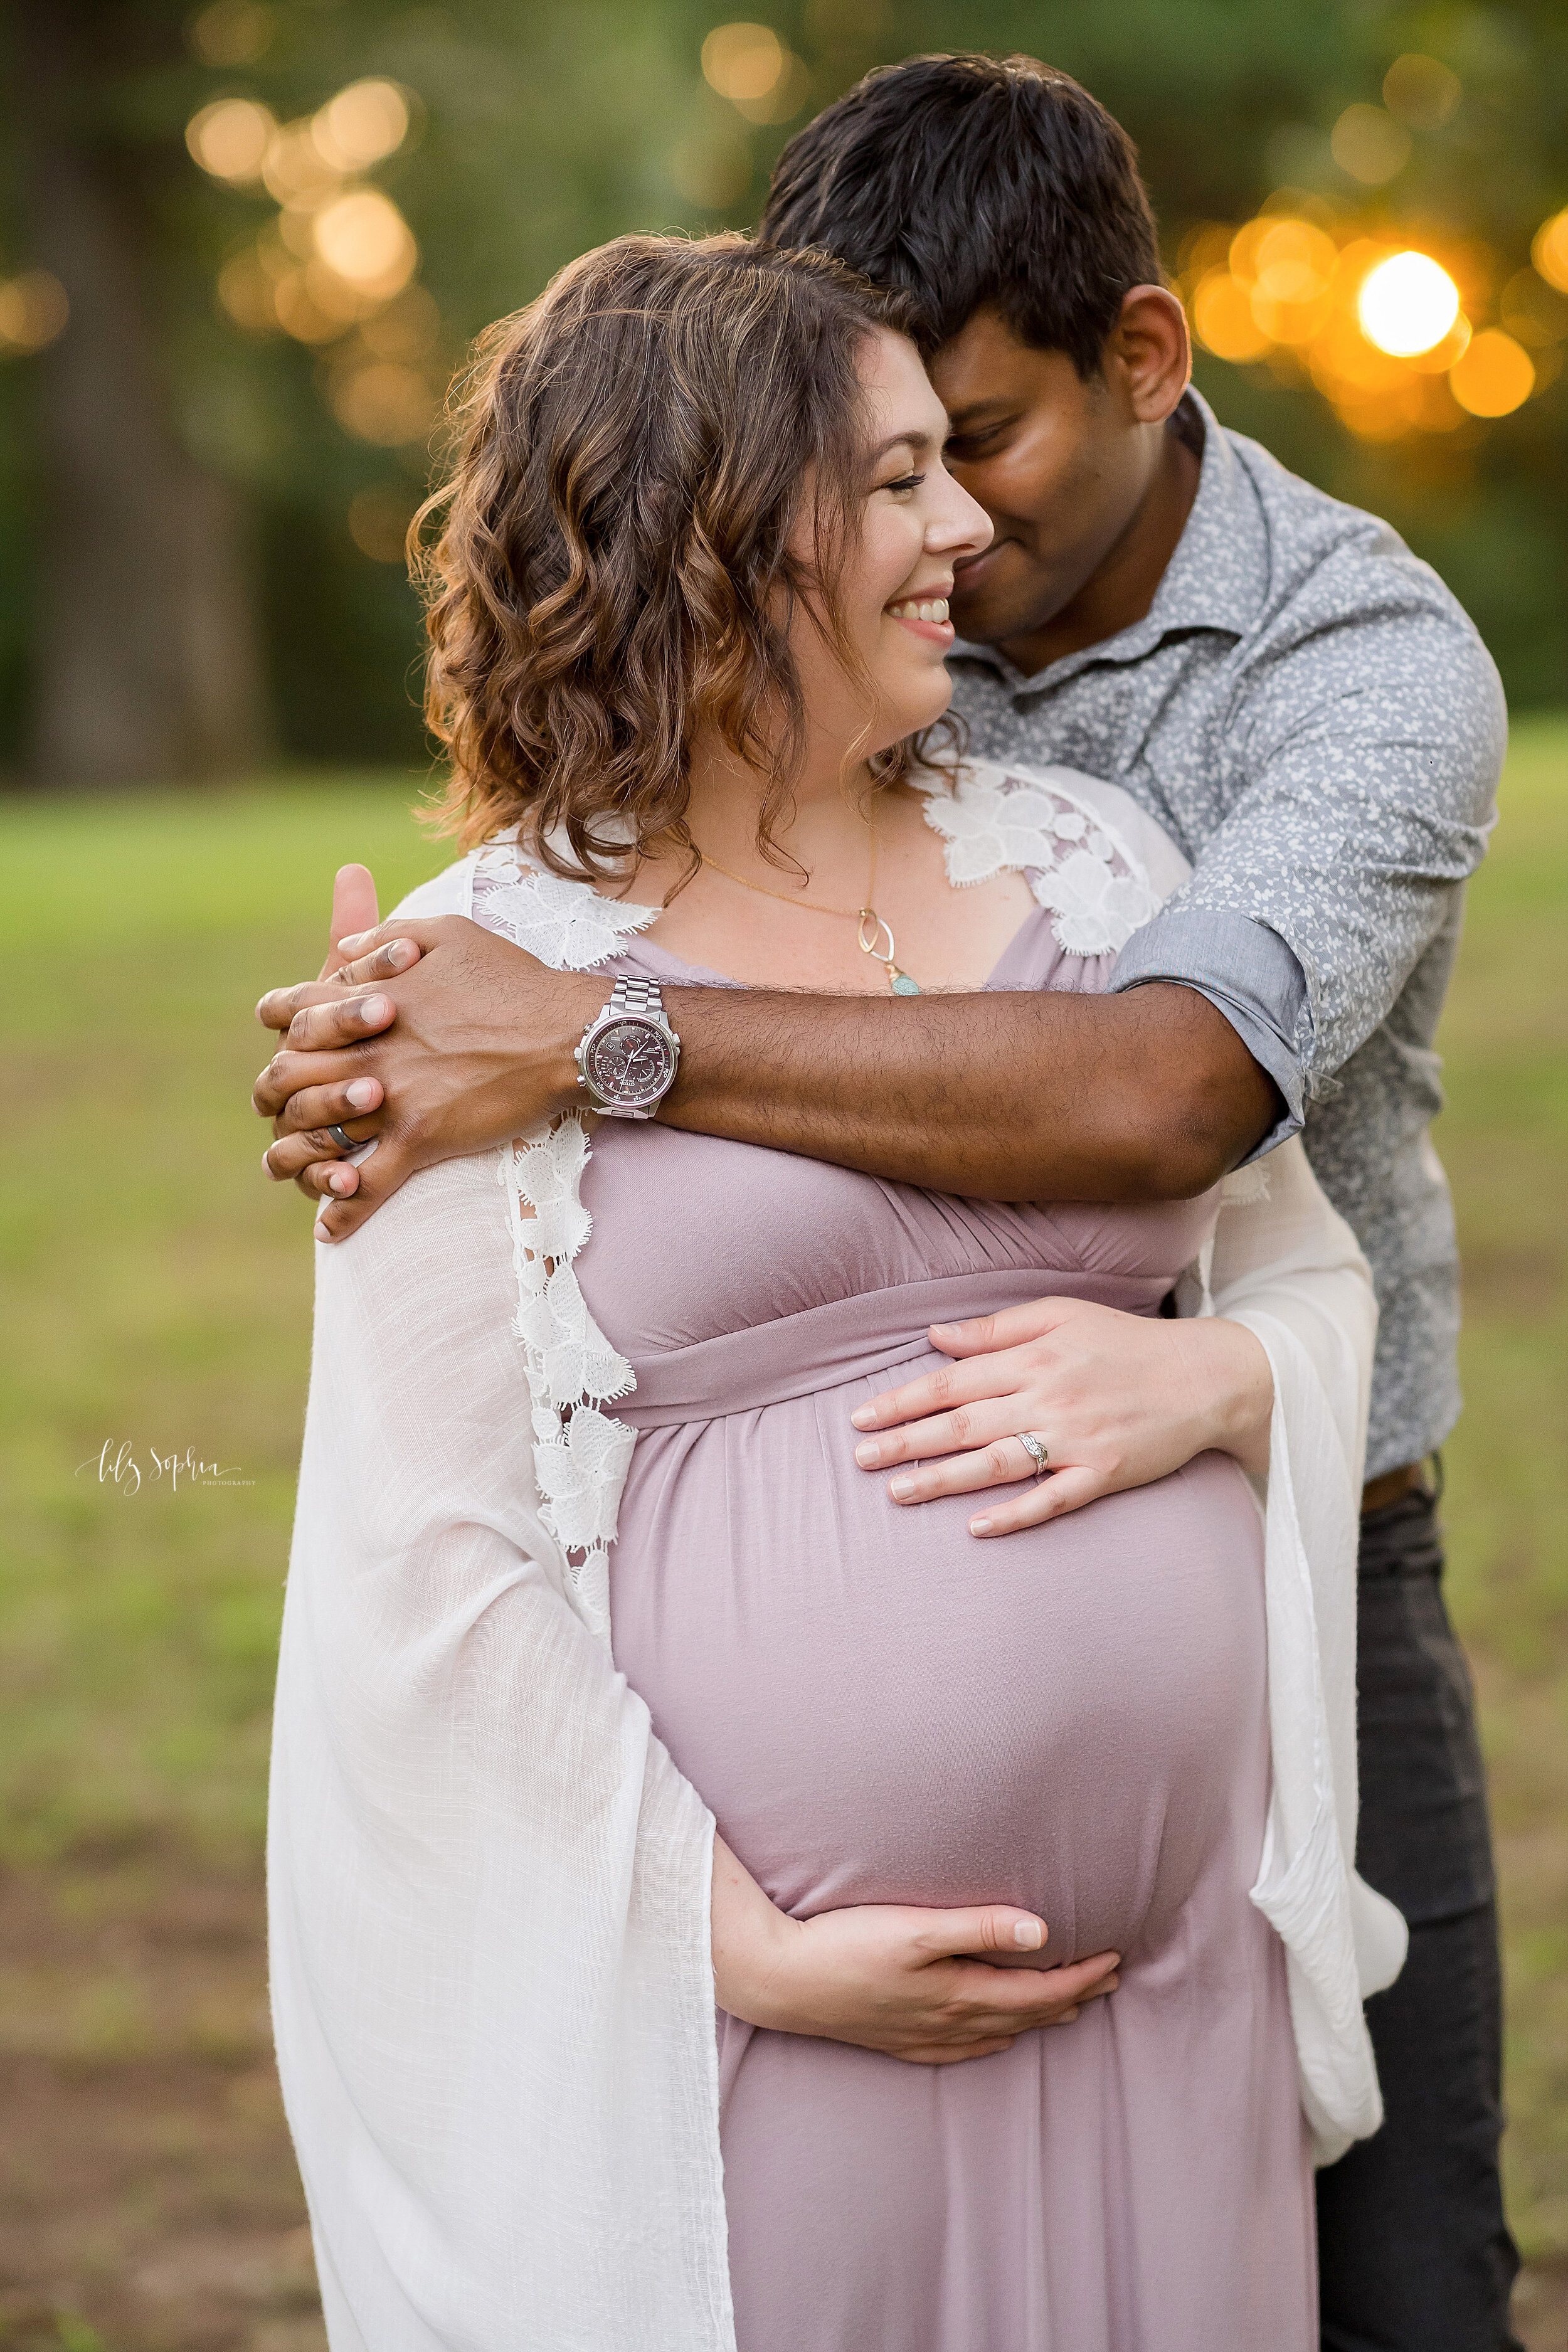  Maternity photo session in a park near Atlanta at sunset with the husband wrapping his arms around his pregnant wife’s shoulders as she frames her belly with her hands. 